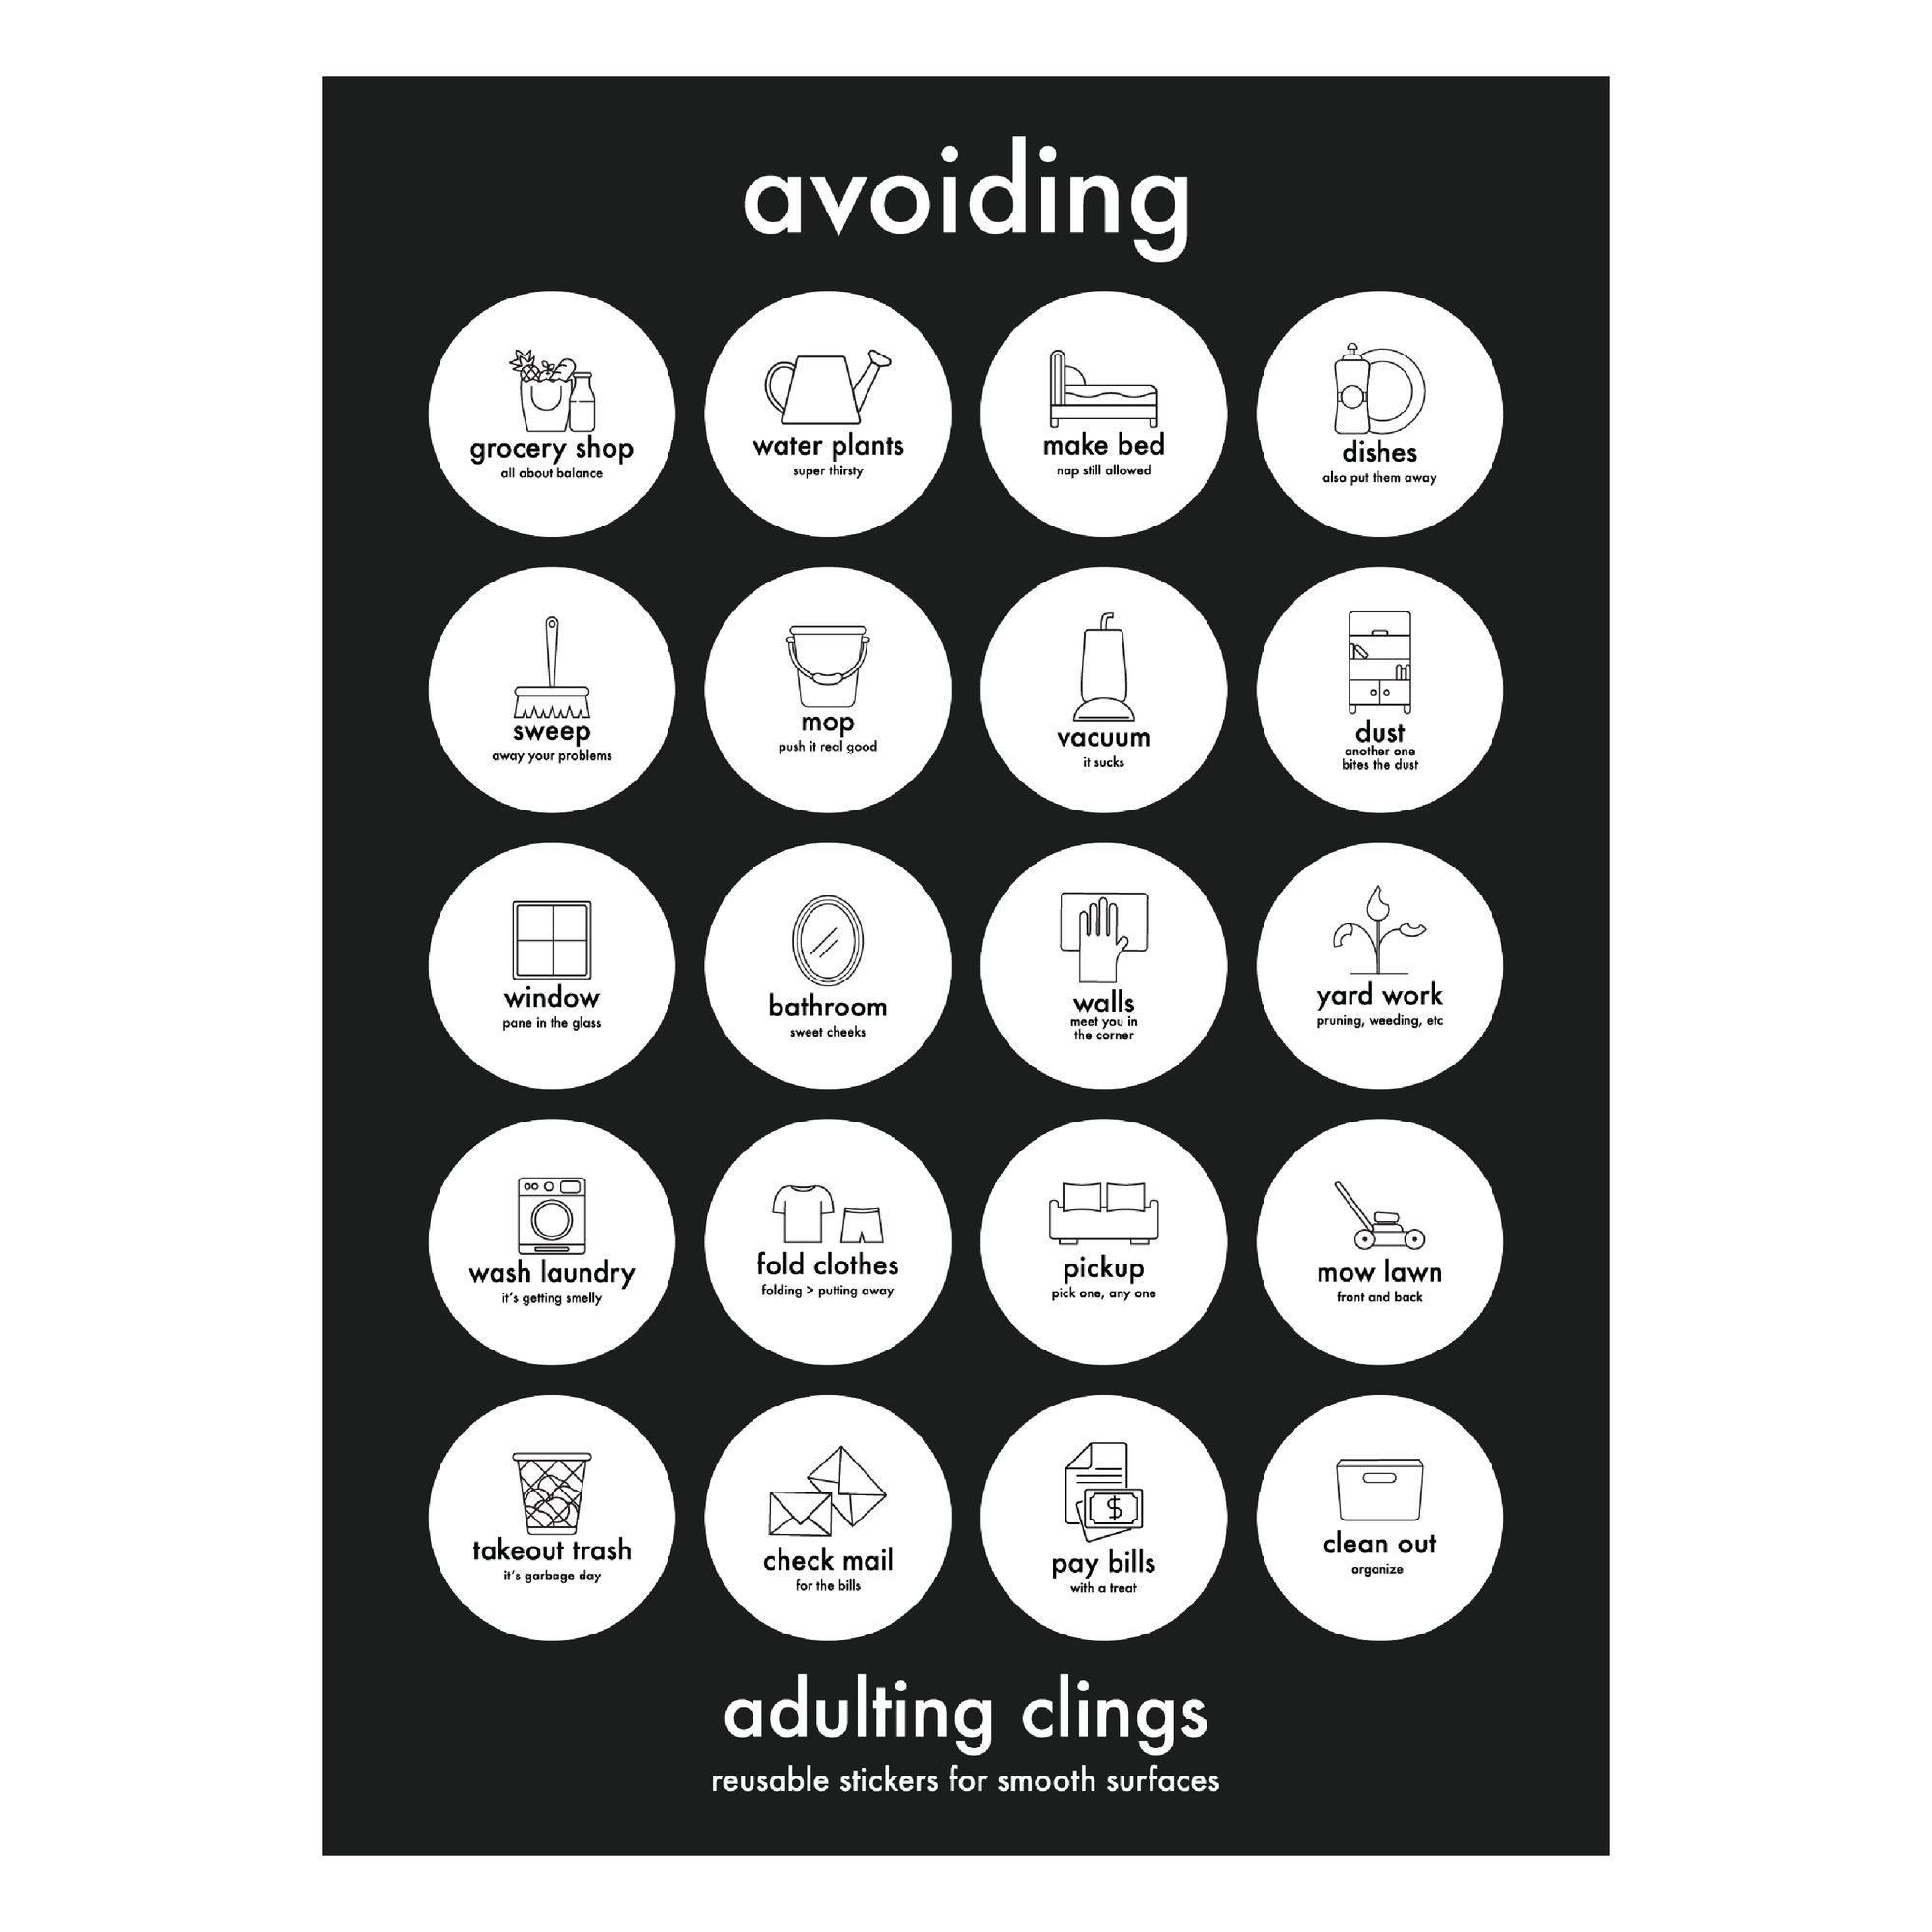 adulting | avoiding | daily clings